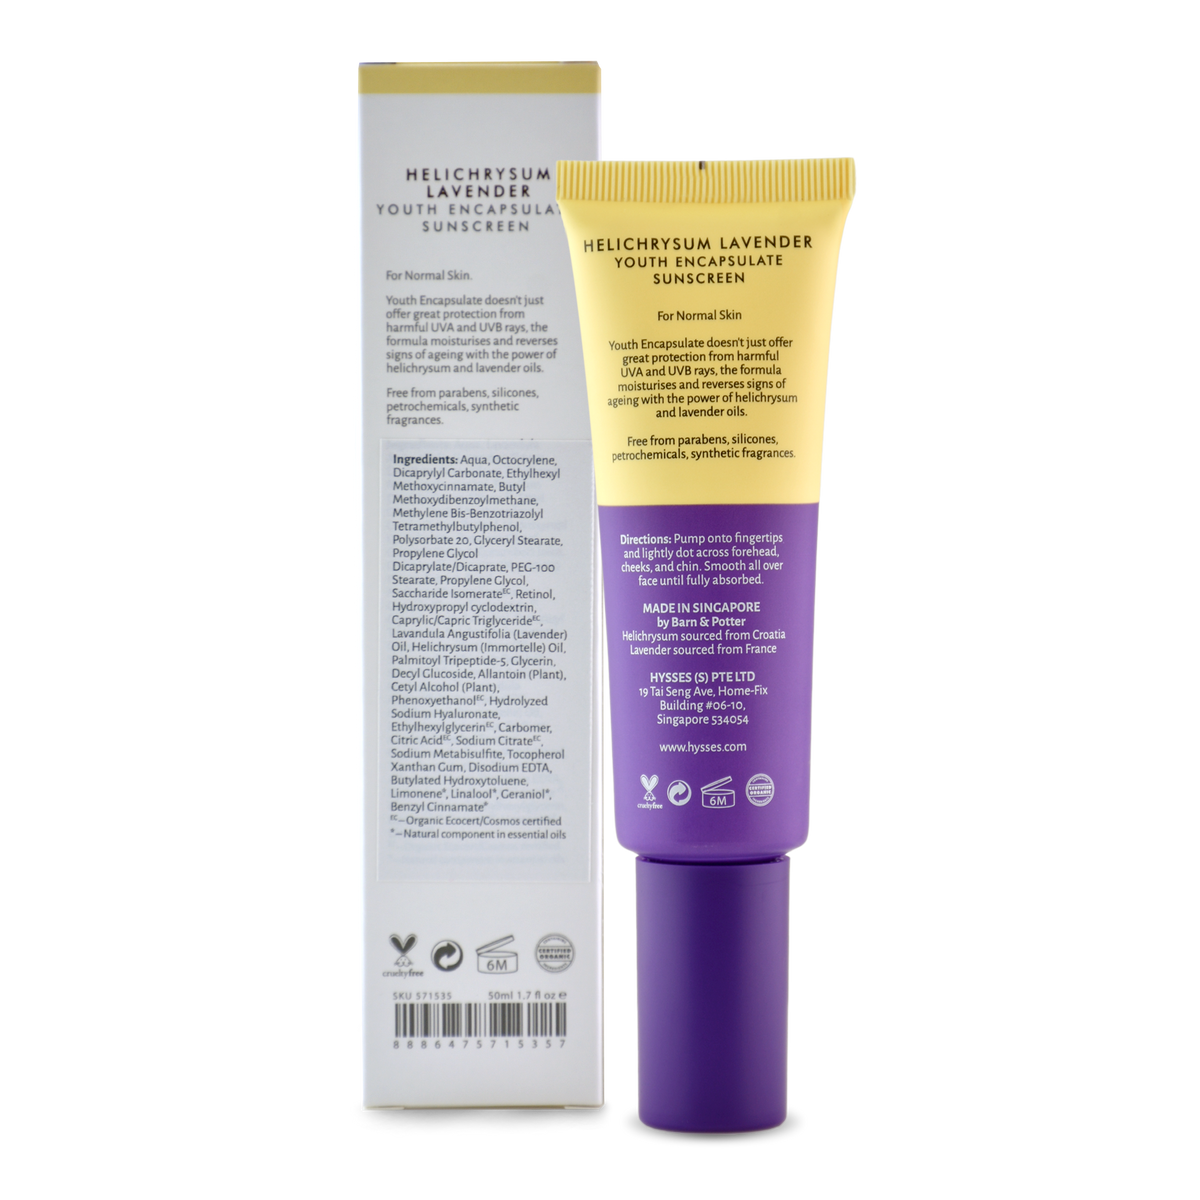 Youth Encapsulate Sunscreen Helichrysum Lavender SPF 40 / PA++